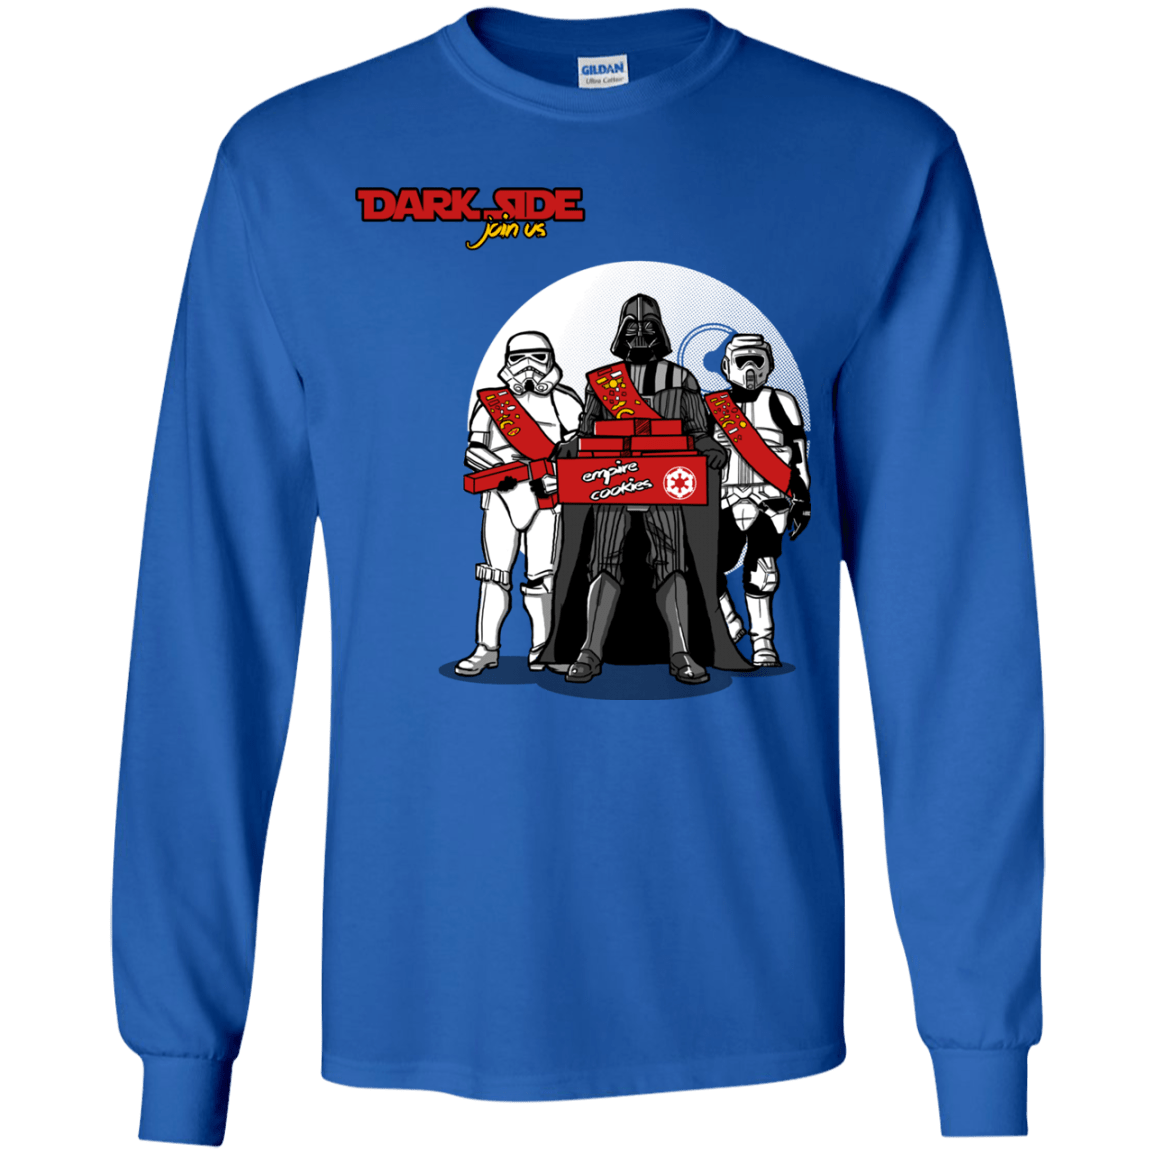 T-Shirts Royal / YS Join The Dark Side Youth Long Sleeve T-Shirt